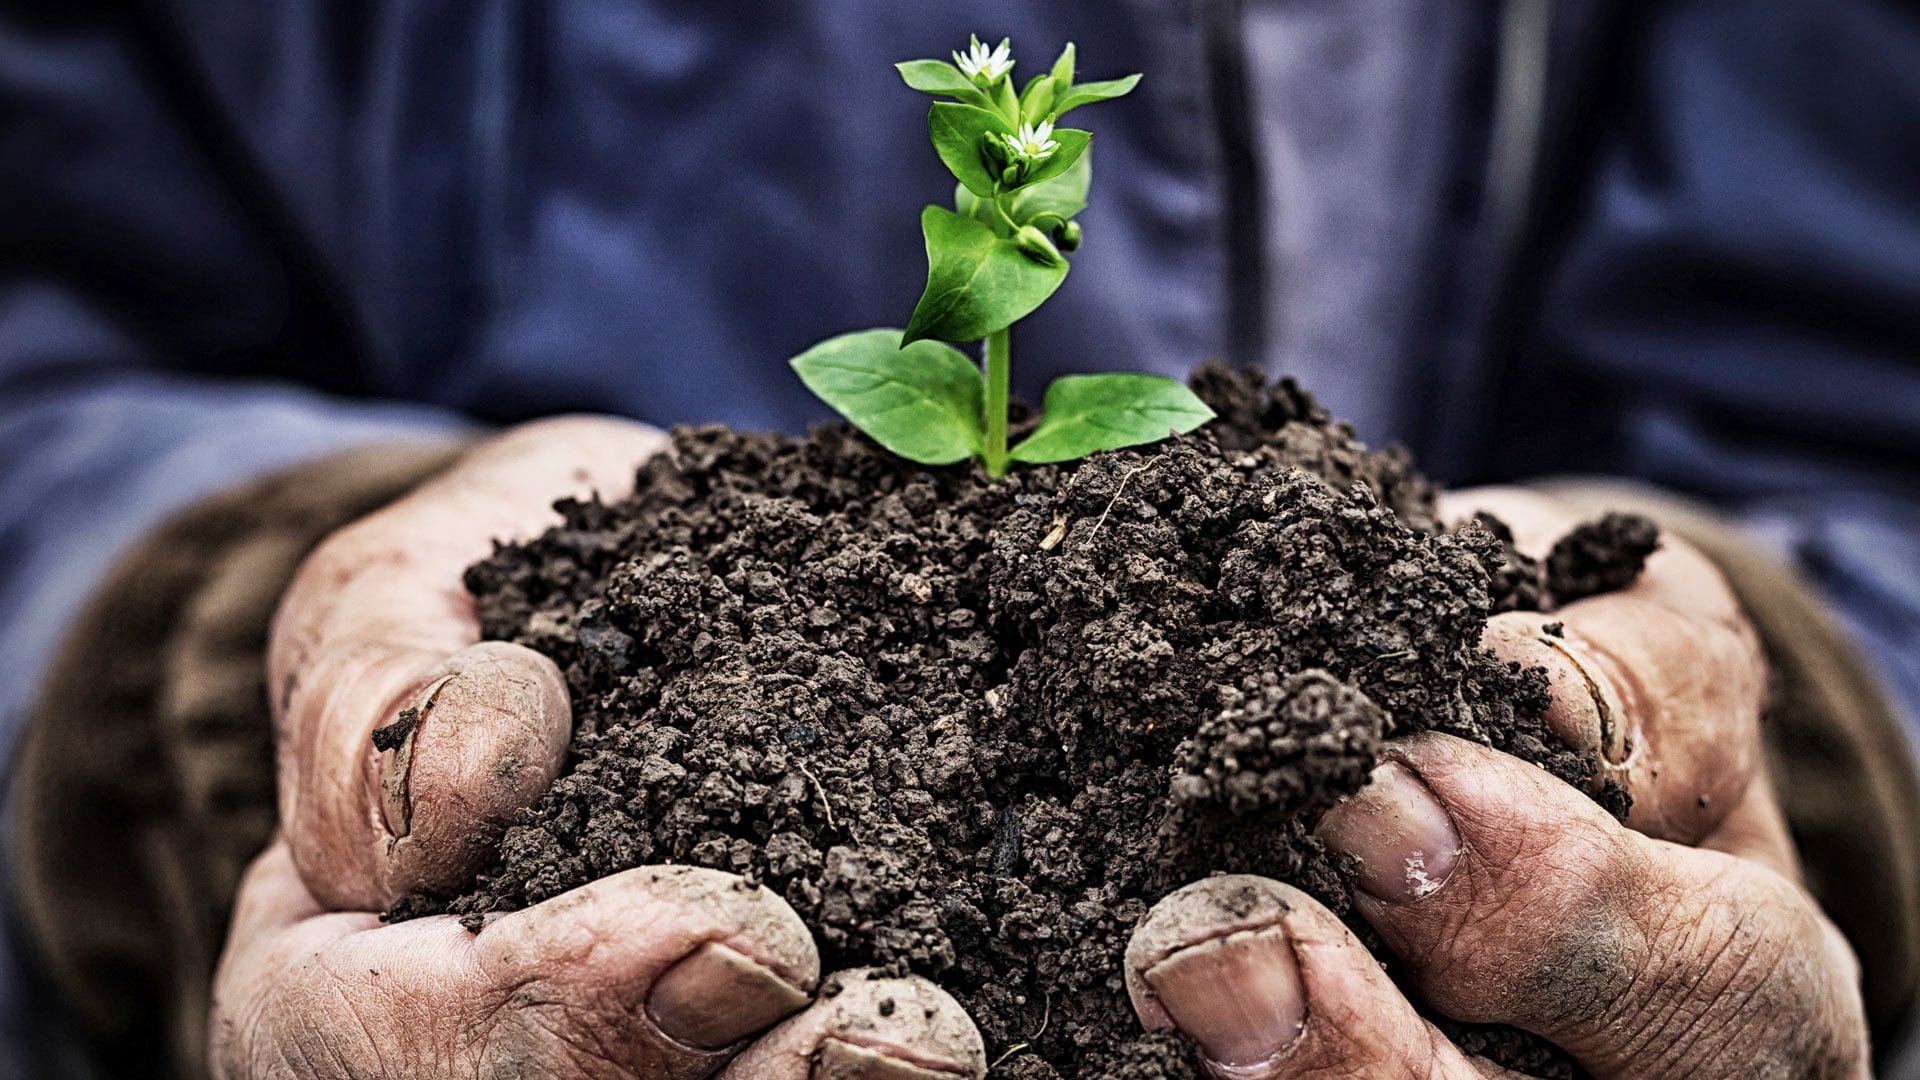 Image of plant in dirt with hands holding dirt